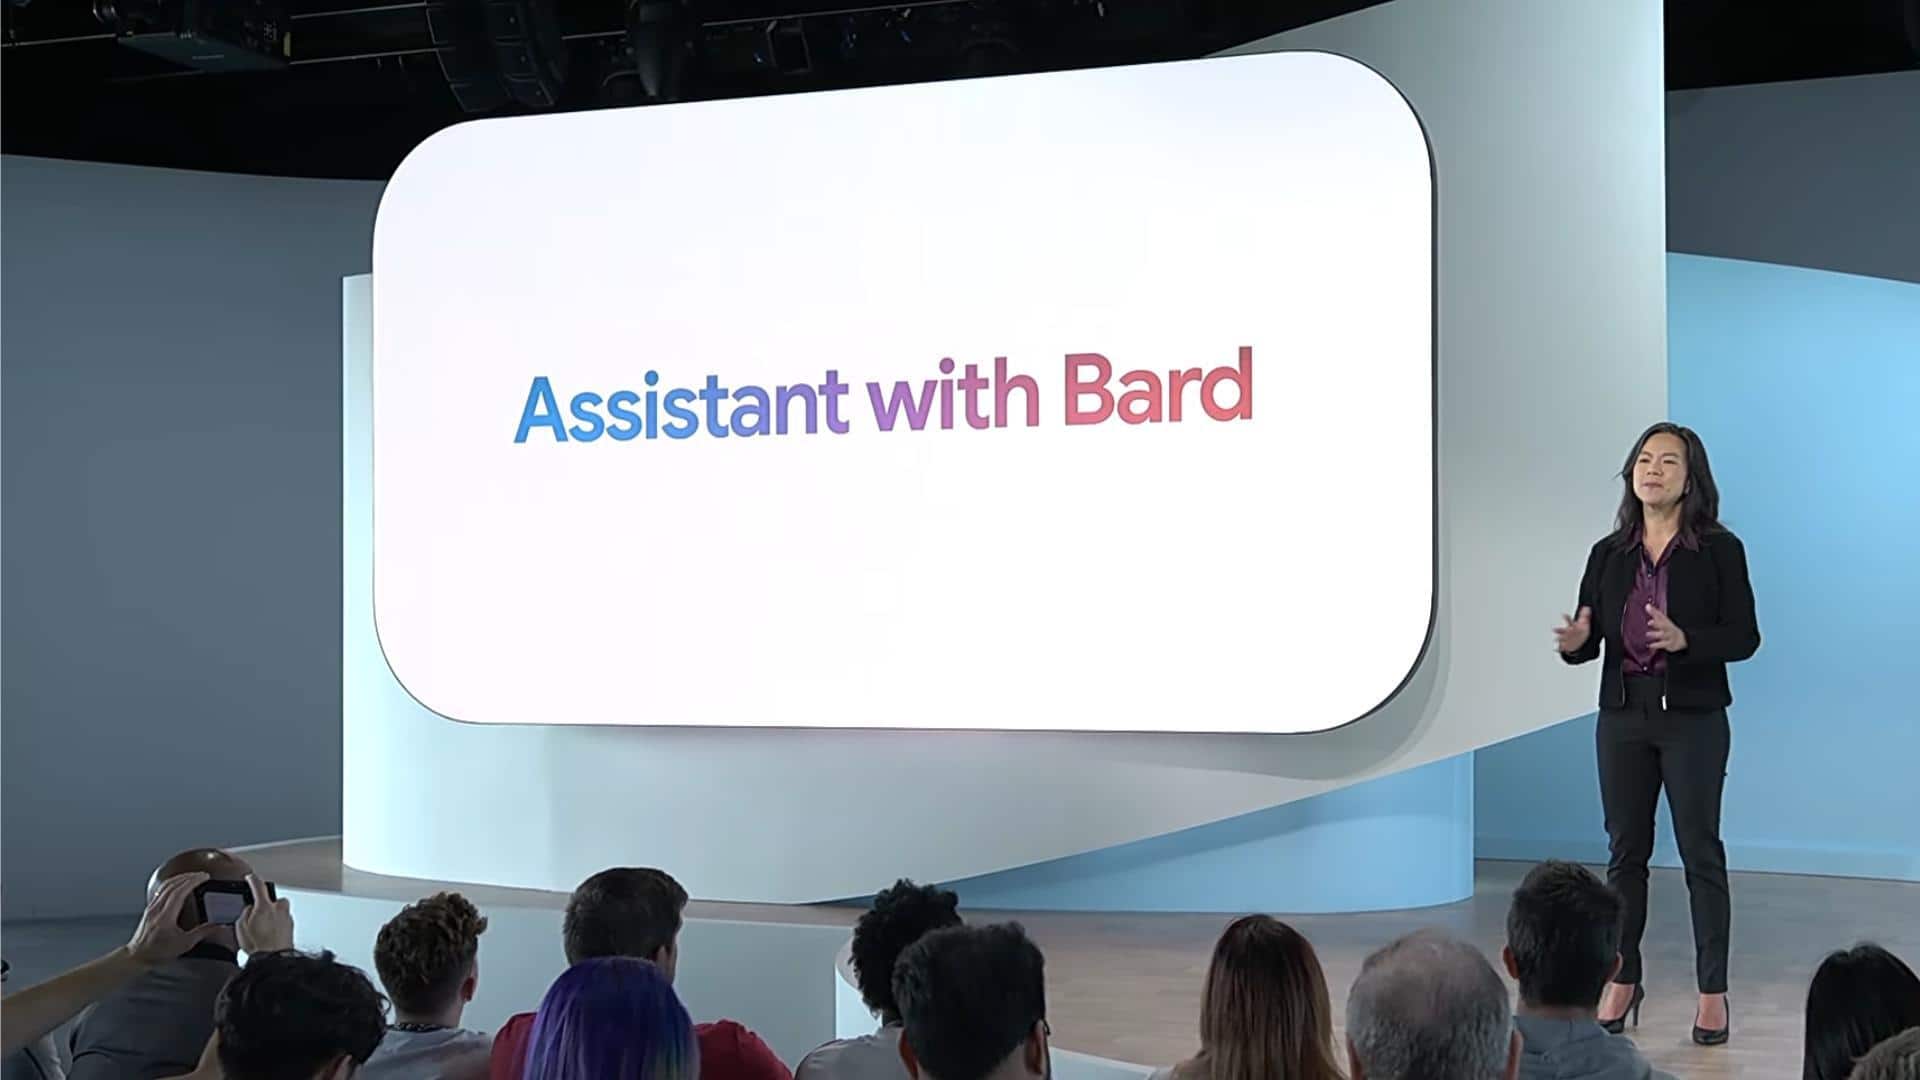 Here's when Pixel smartphone users will get Assistant with Bard